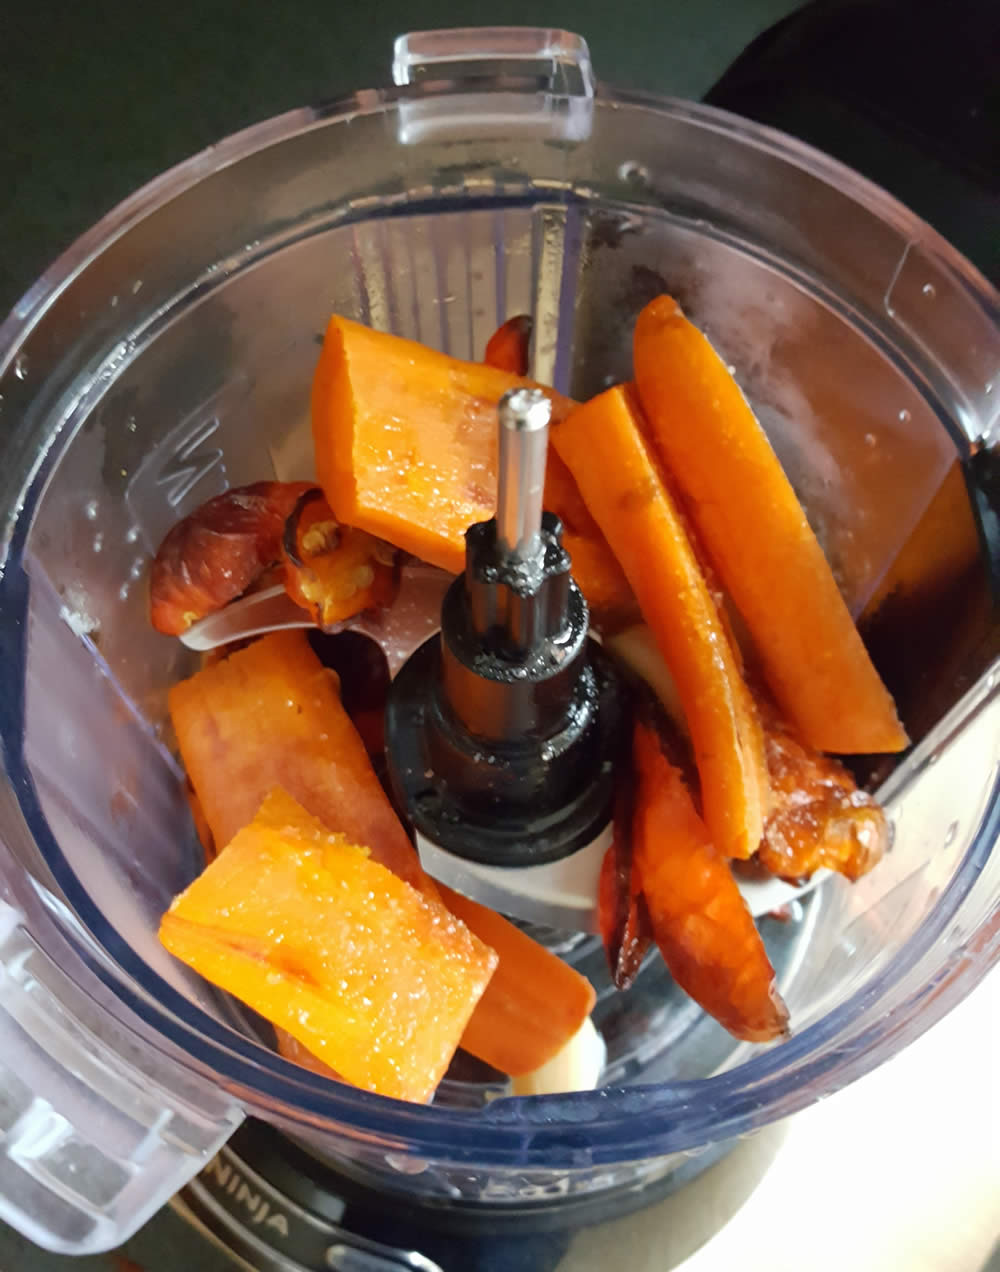 Roasted carrots, garlic and ghost peppers, ready to make sauce